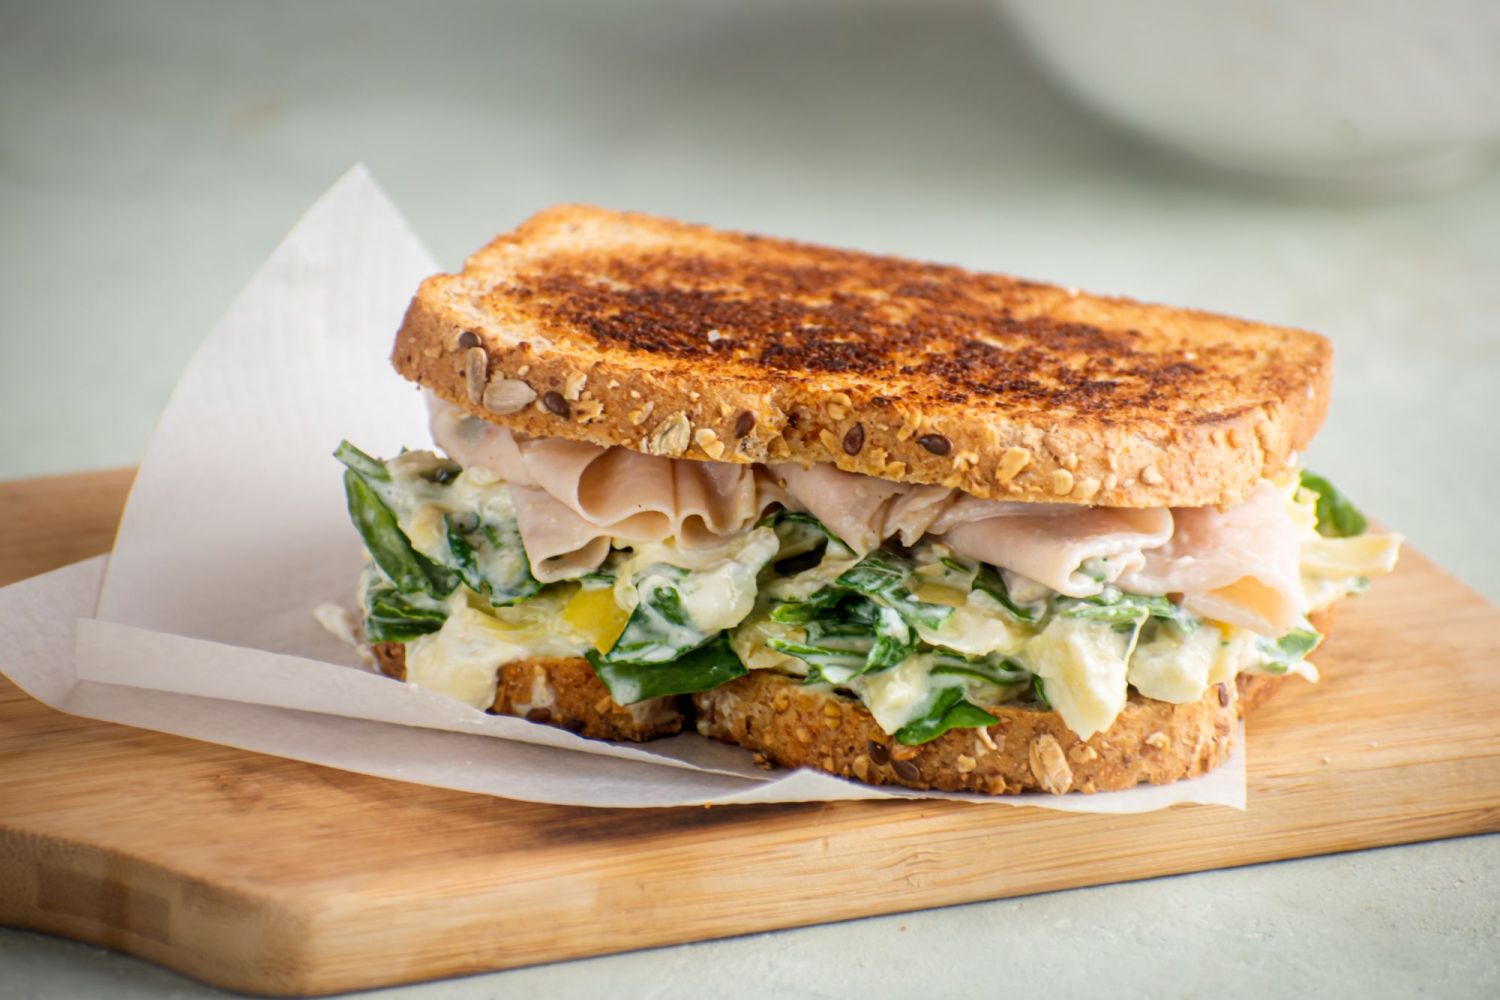 Grilled cheese with spinach, artichoke, cream cheese, and mozzarella cheese served on toasted wheat bread.